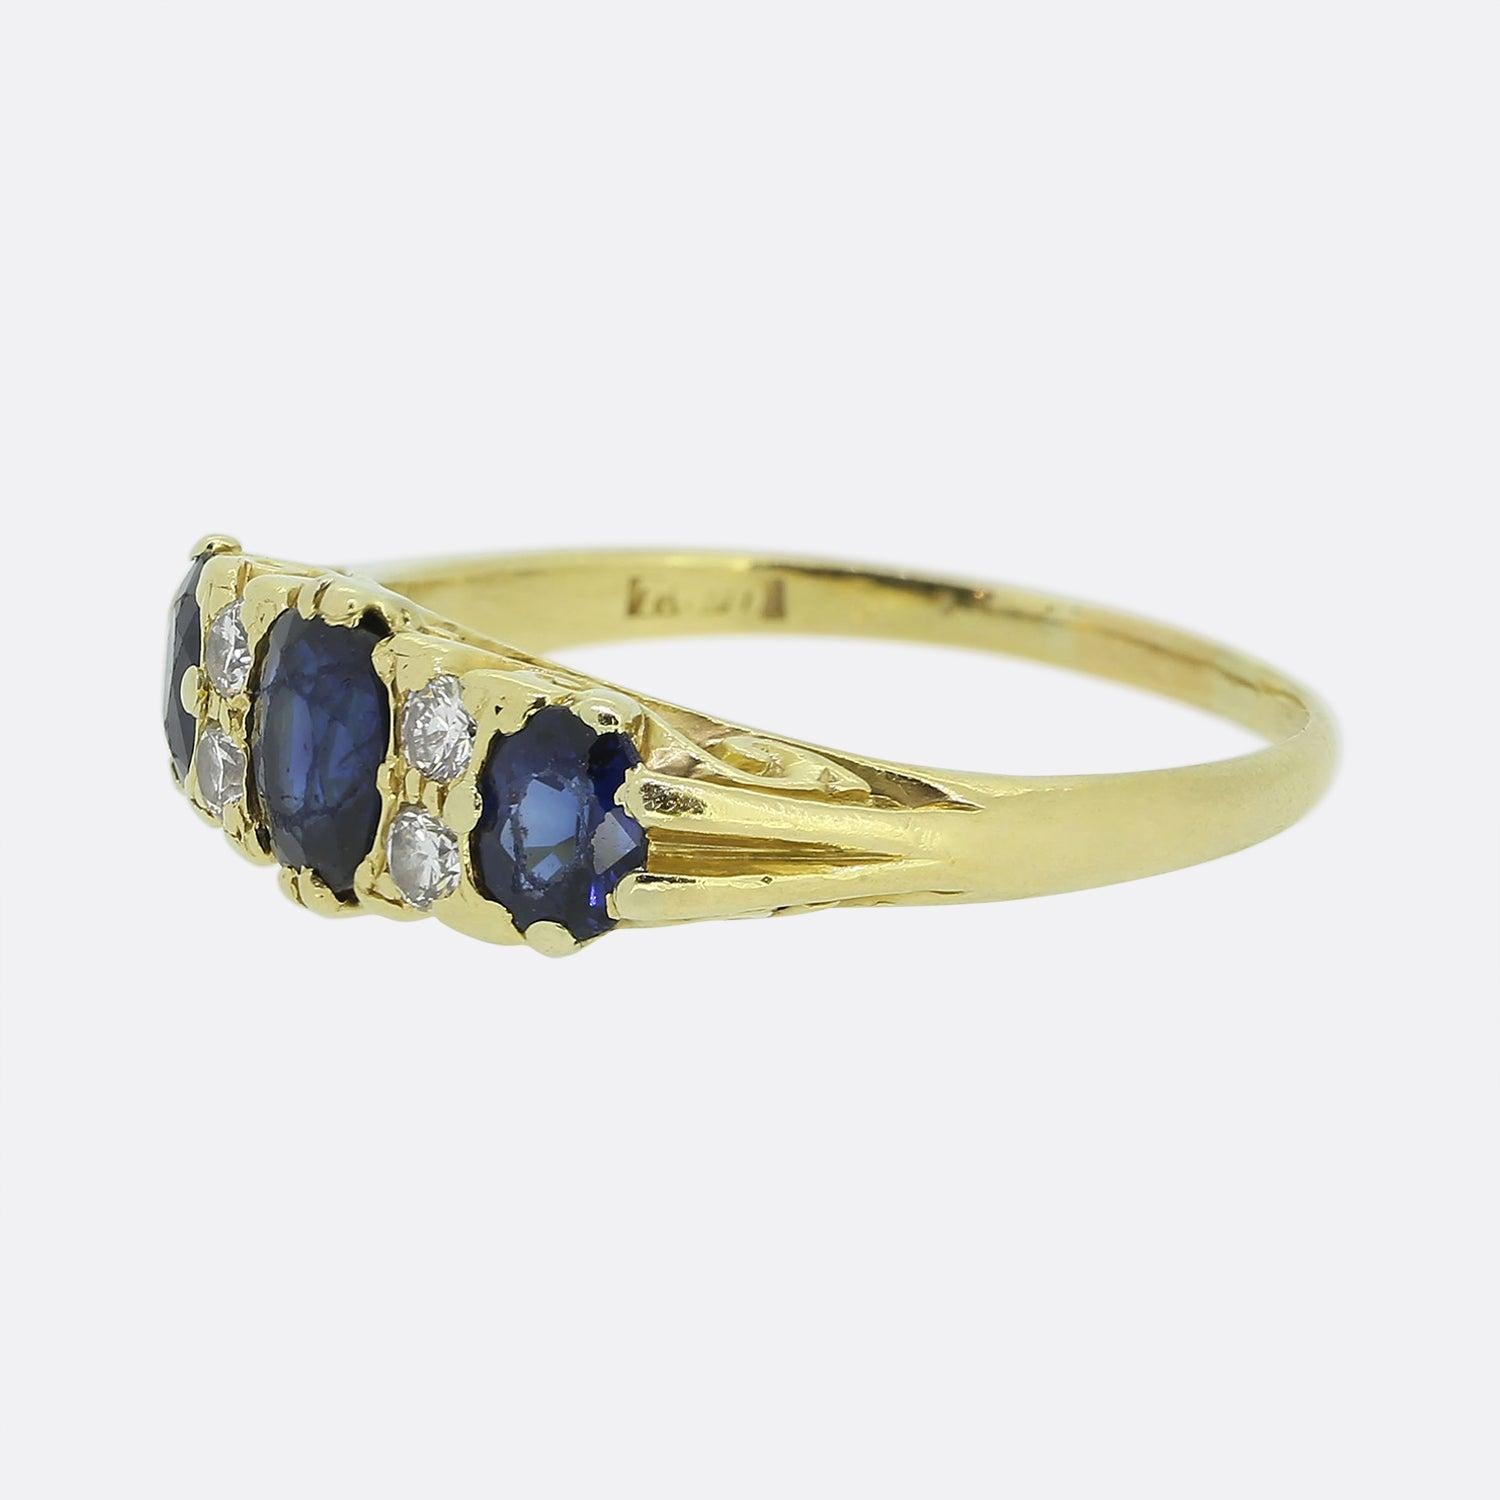 Here we have a classical three-stone sapphire and diamond ring. This vintage piece showcases three oval faceted sapphires across the face with the centre stone being slightly larger than its two counterparts. Each sapphire possesses a royal navy